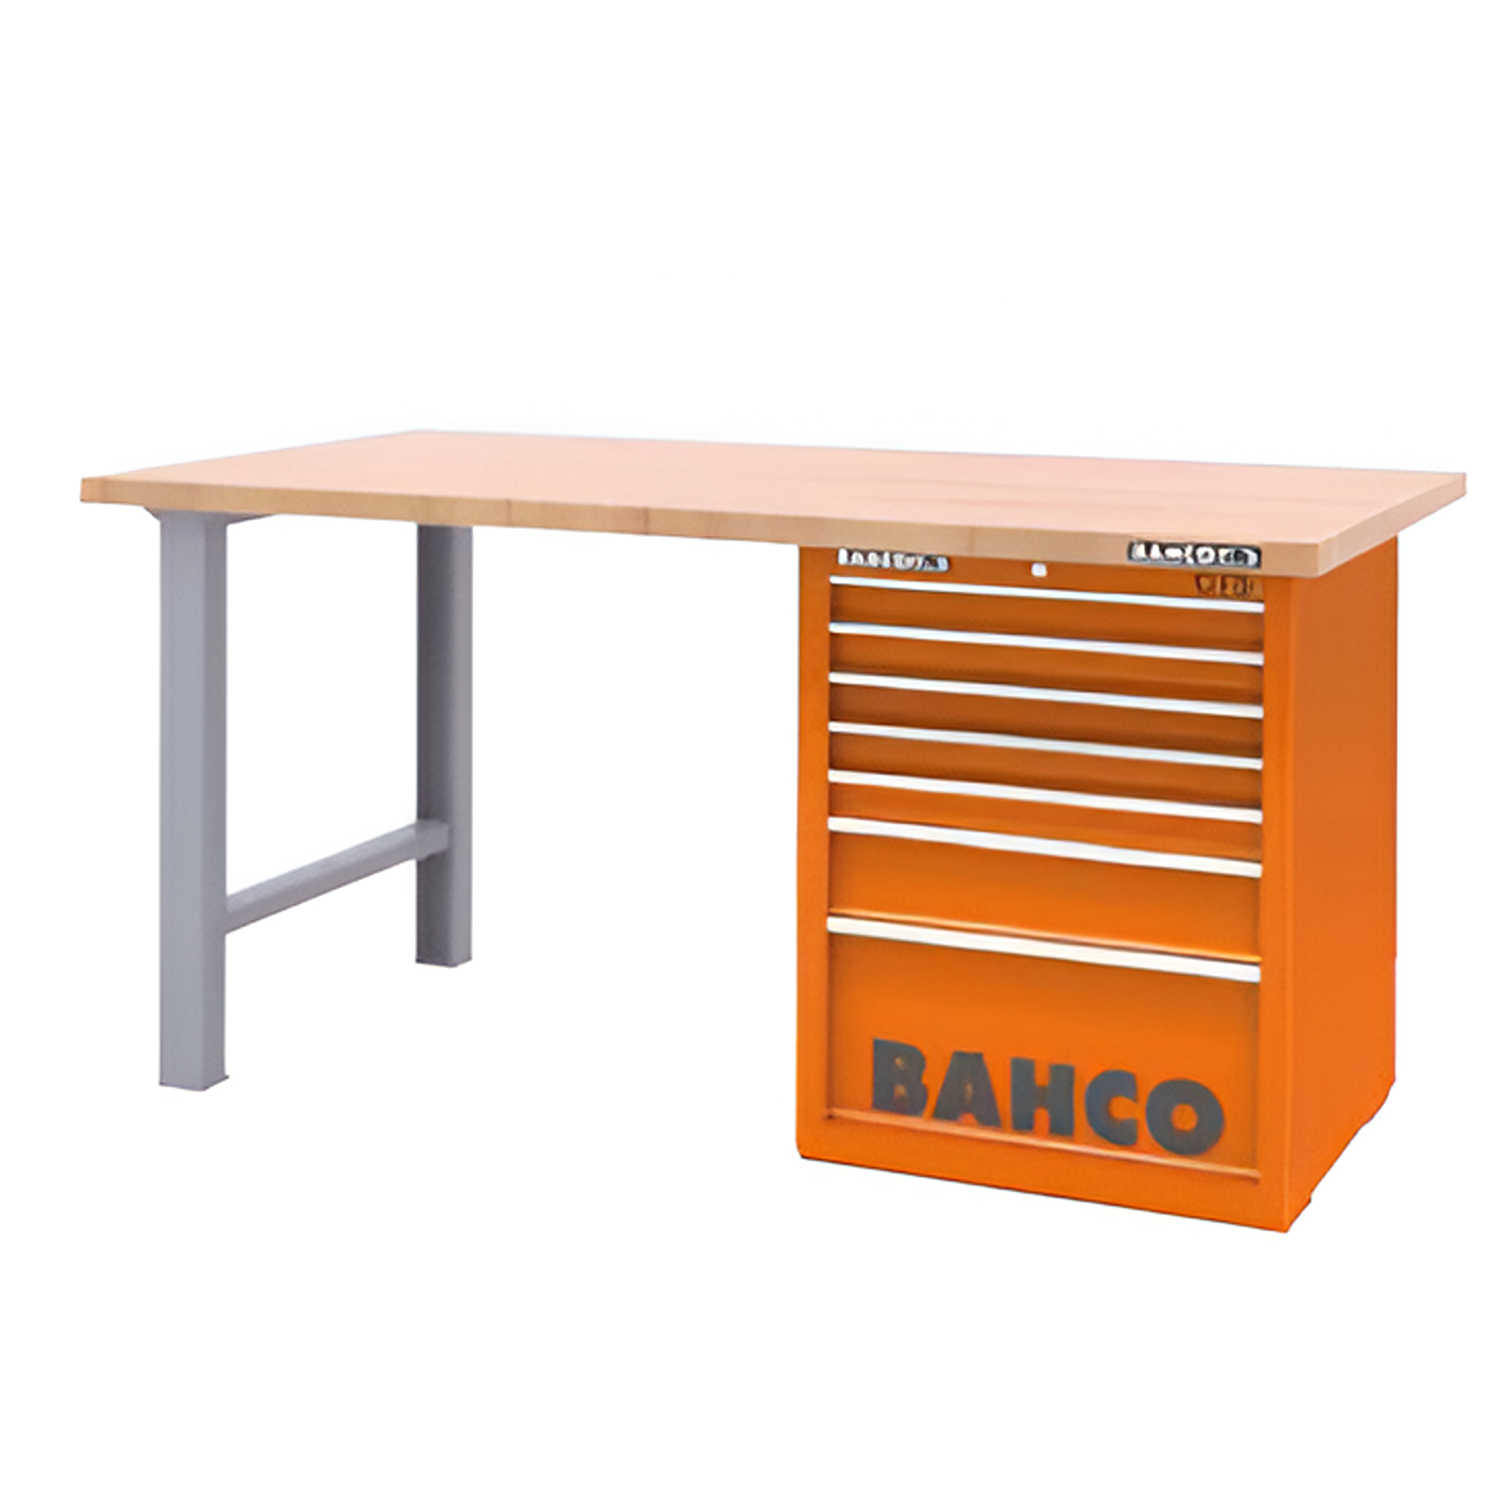 BAHCO 1495KHWB15TS Wall or Bench Mount Cabinet with Shutter - Premium Bench Mount Cabinet from BAHCO - Shop now at Yew Aik.